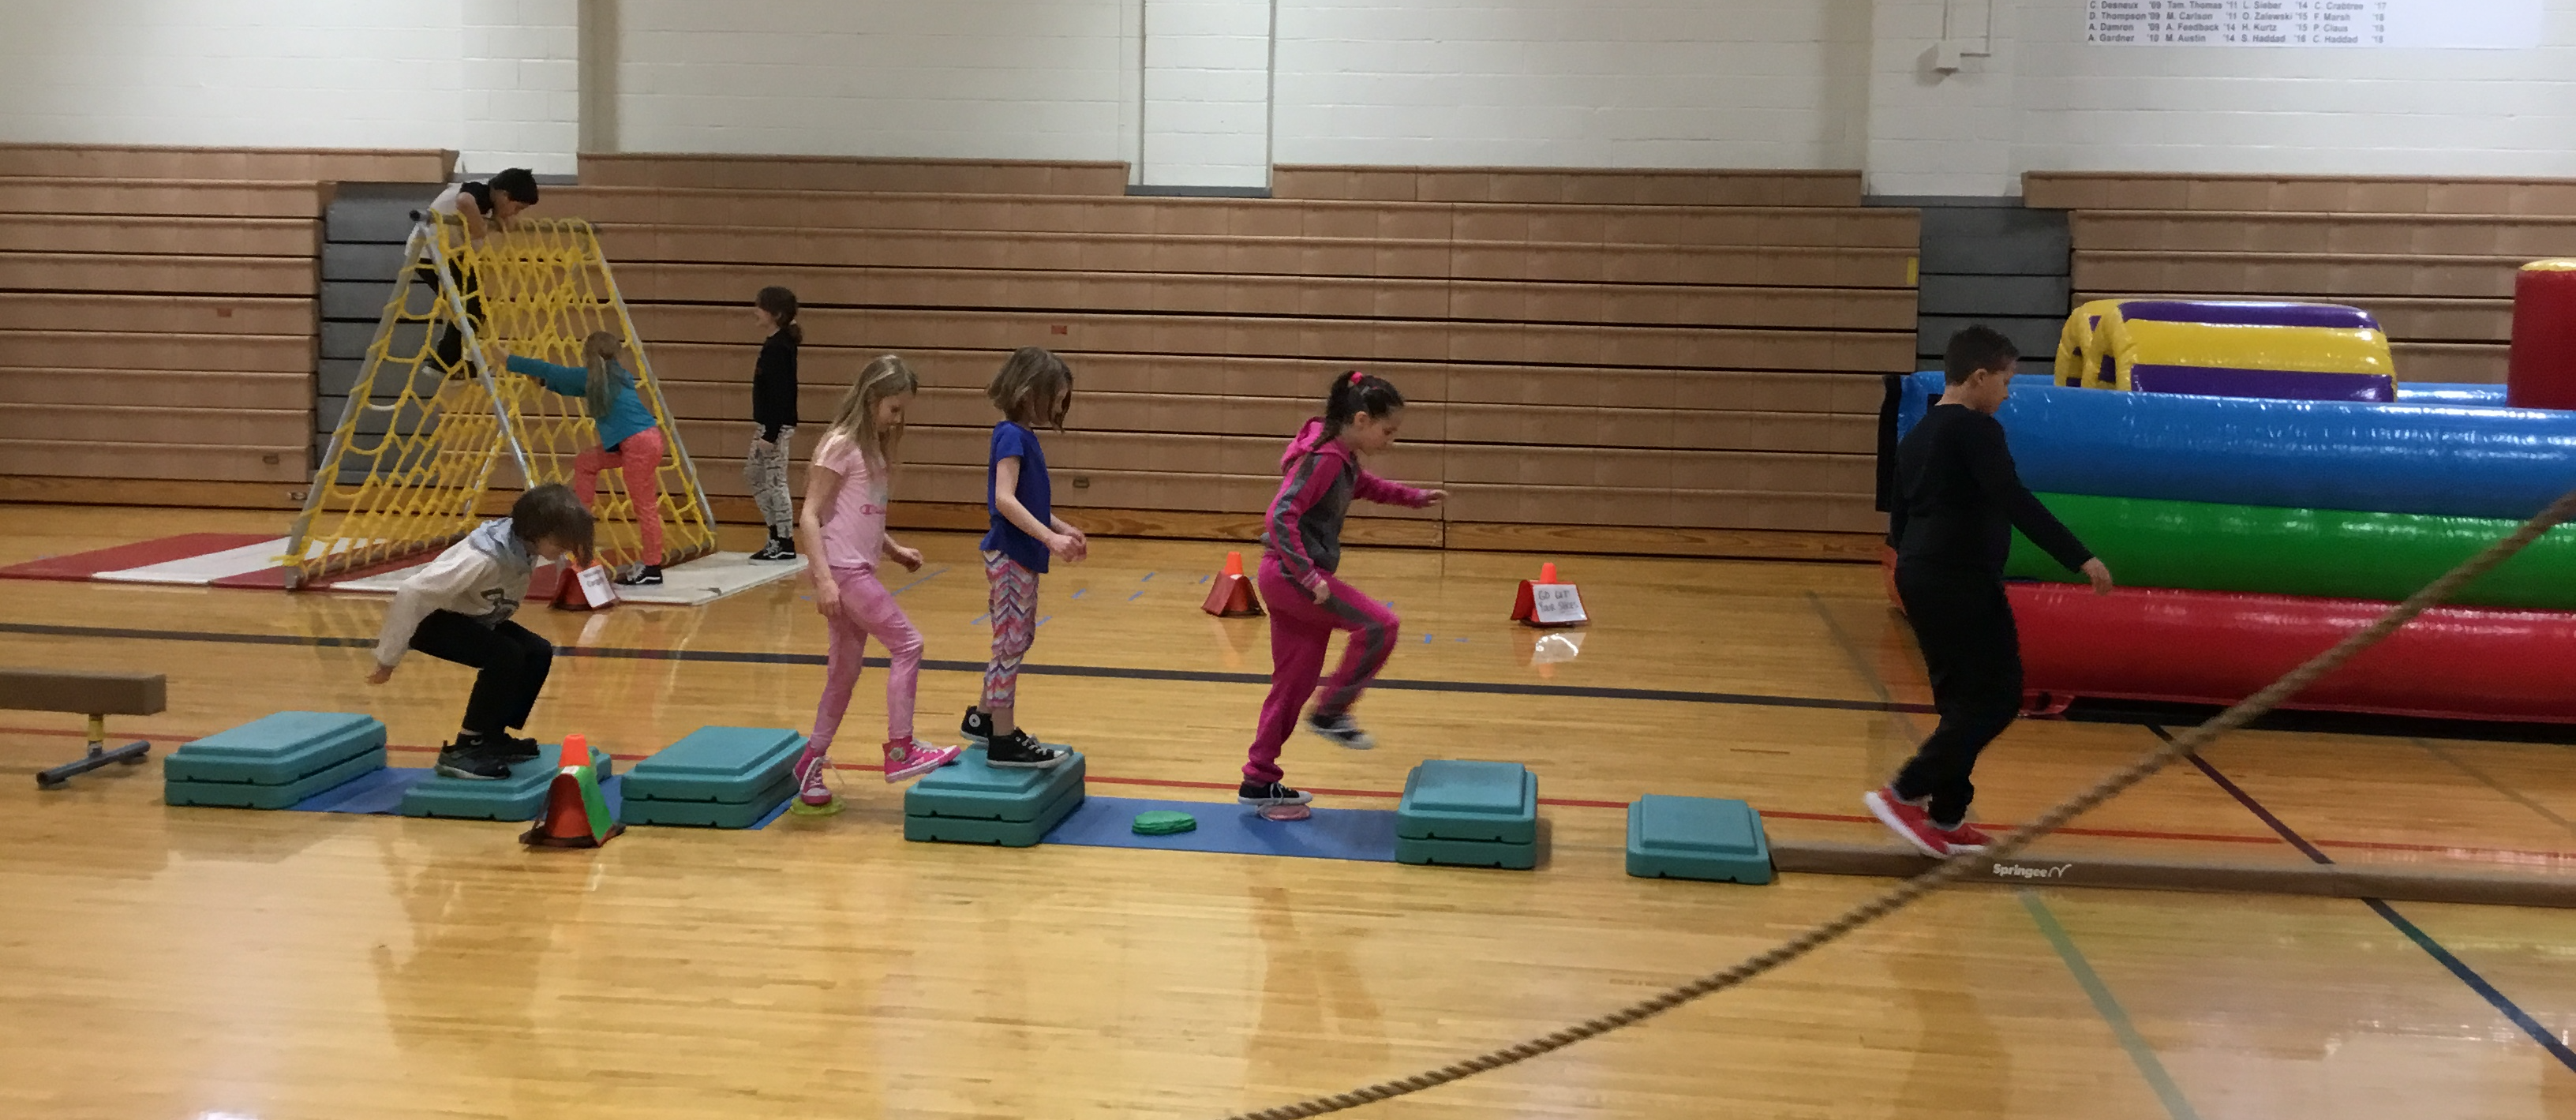 Students try a Ninja Warrior course in P.E. class